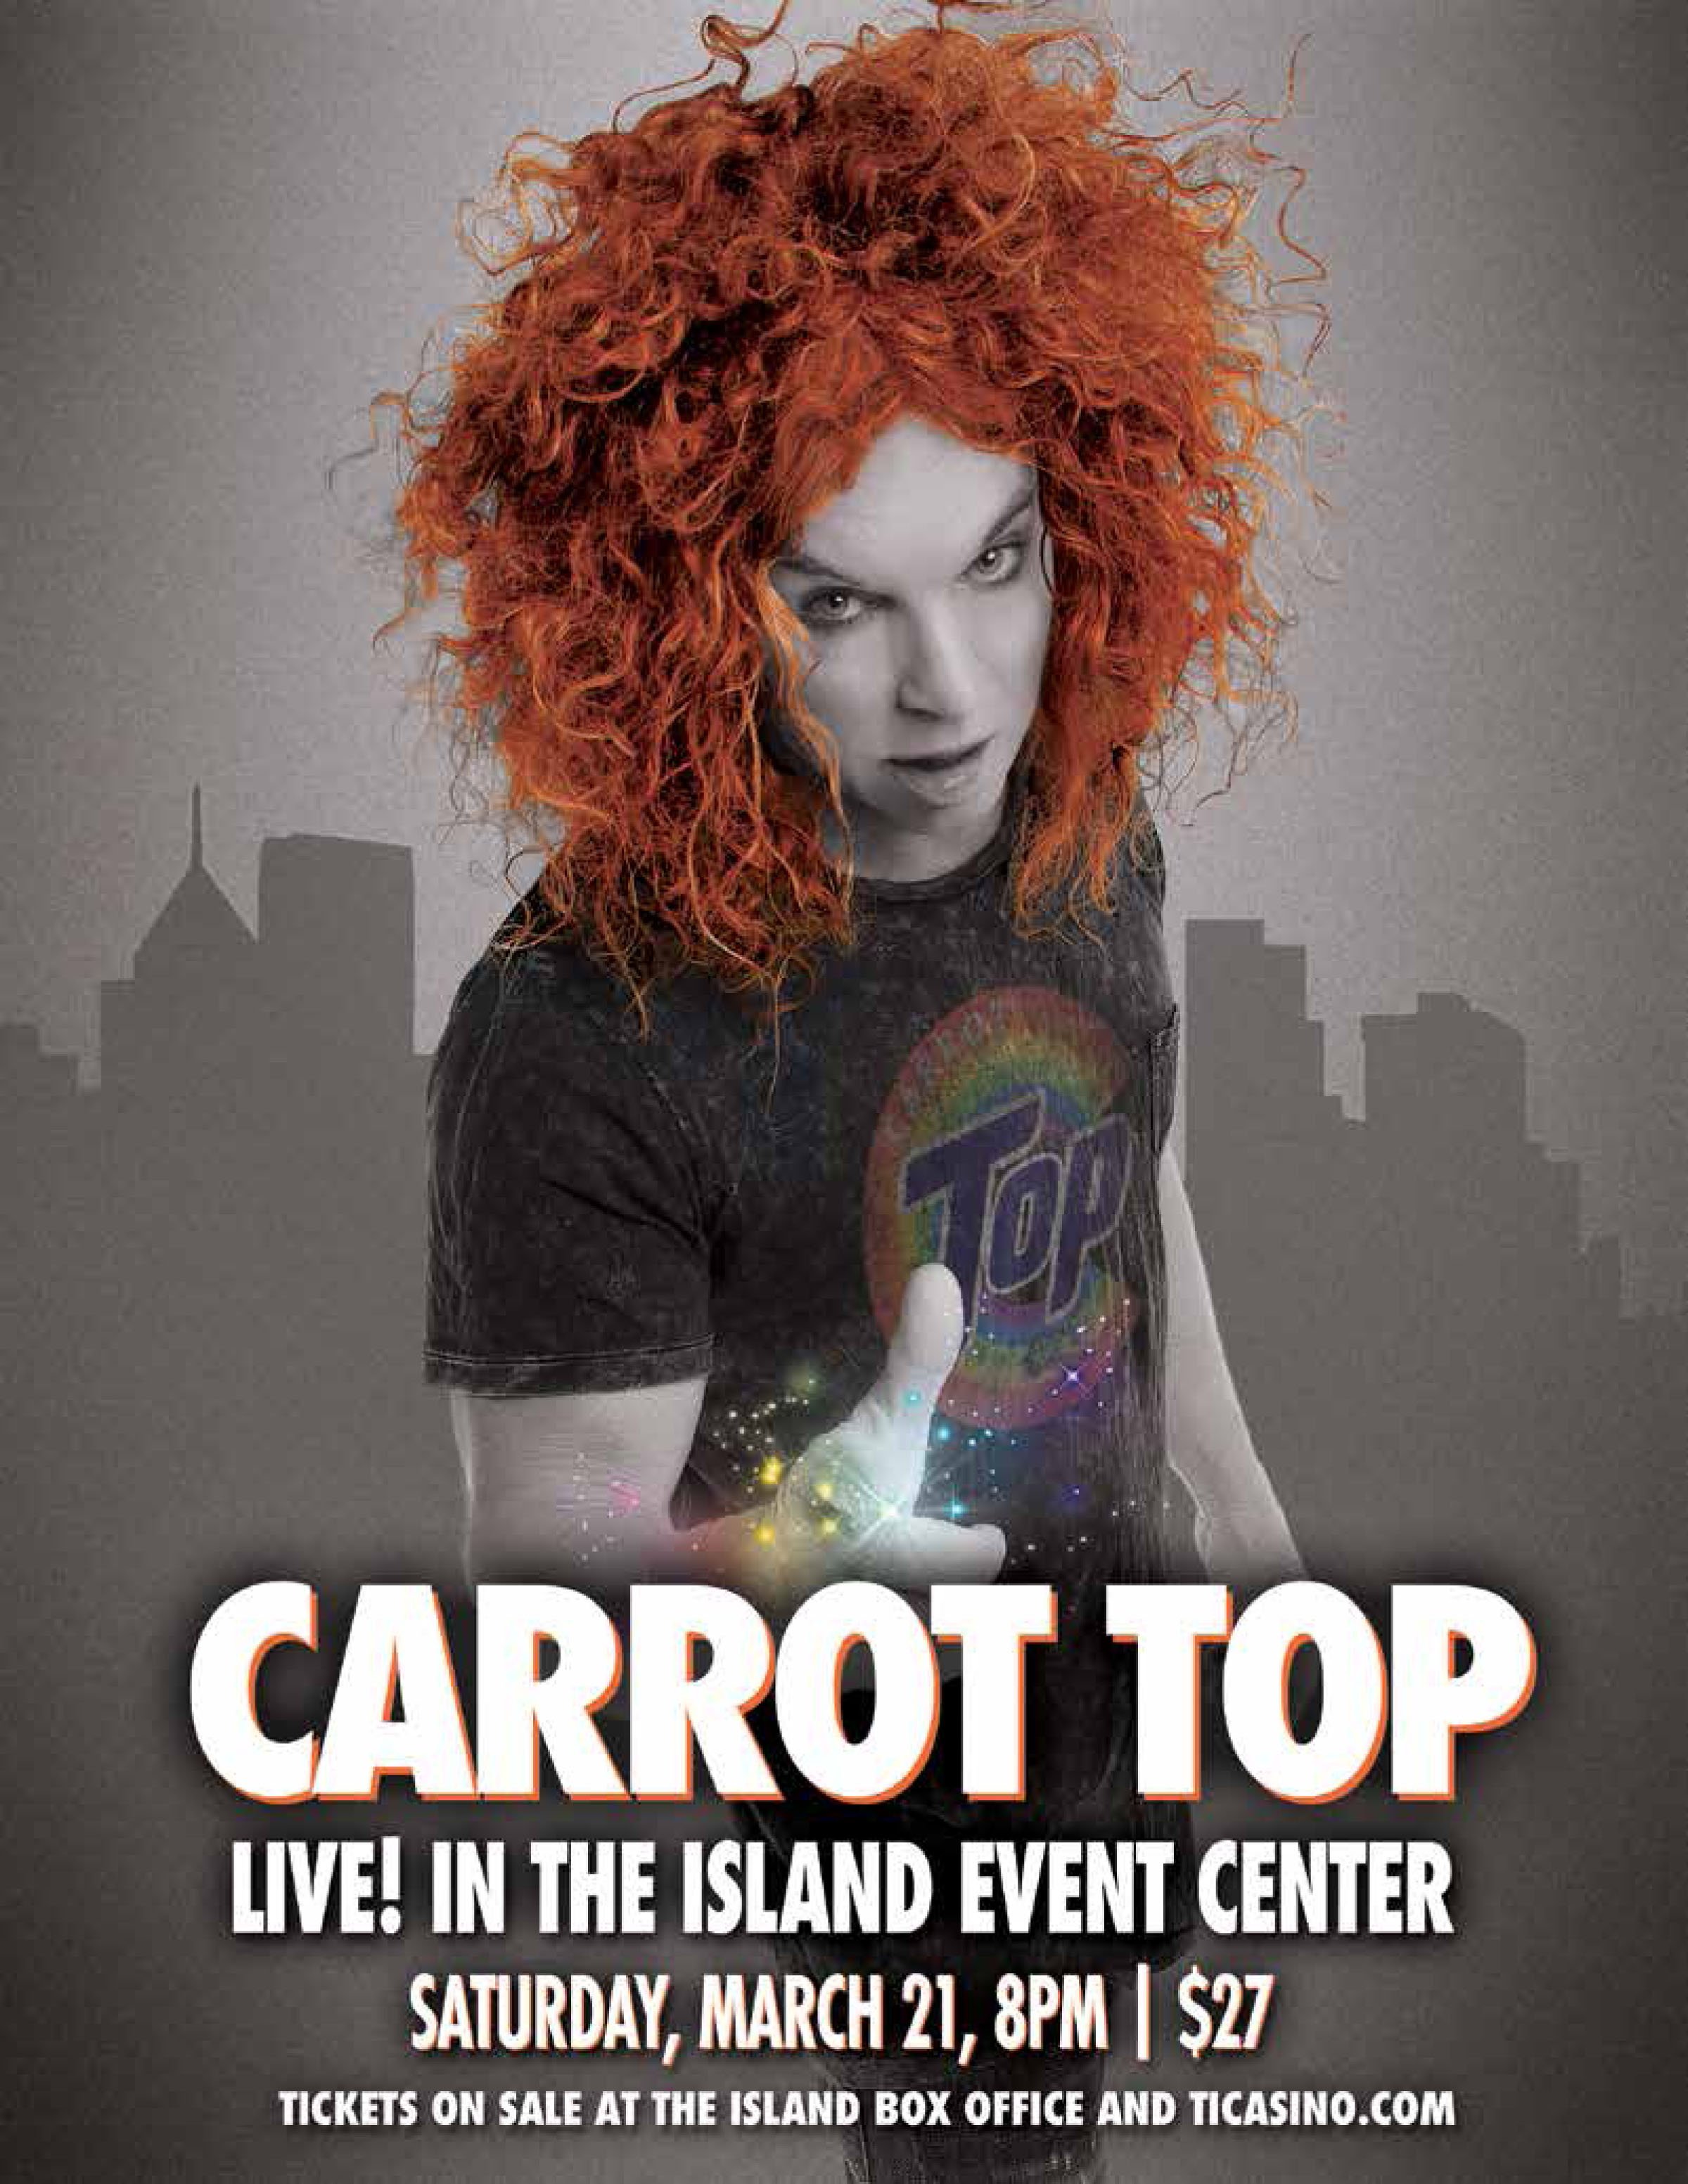 Carrot Top on Twitter: "ROAD show on sale for the March 21 in Welch, Minnesota will be soon. I'll be at the @ticasino. Head to https://t.co/1ORQwbJHTn for more information!! #roadshow #